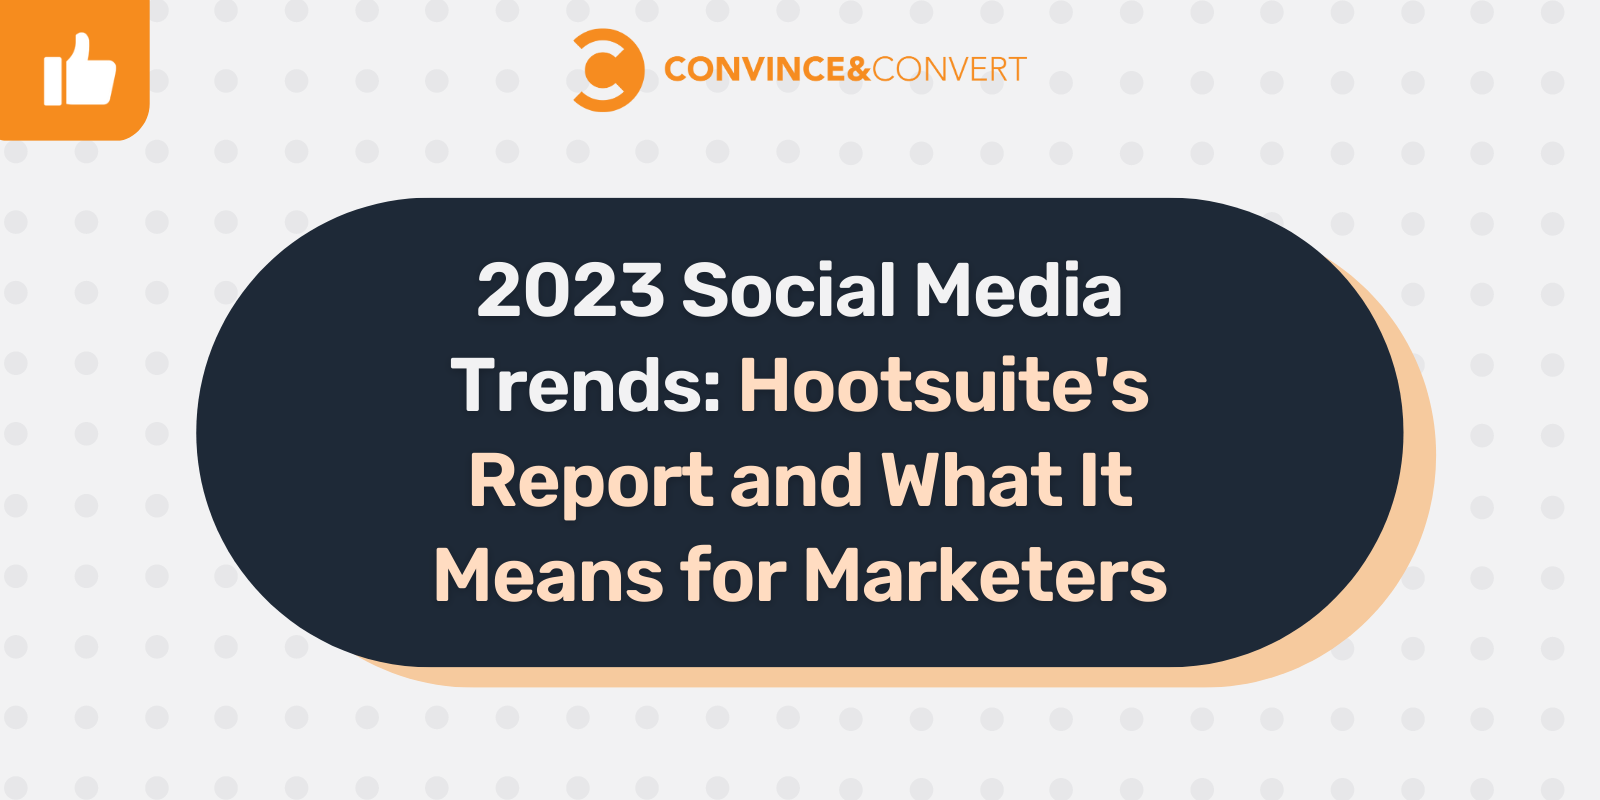 2023 Social Media Trends Hootsuite's Report and What It Means for Marketers